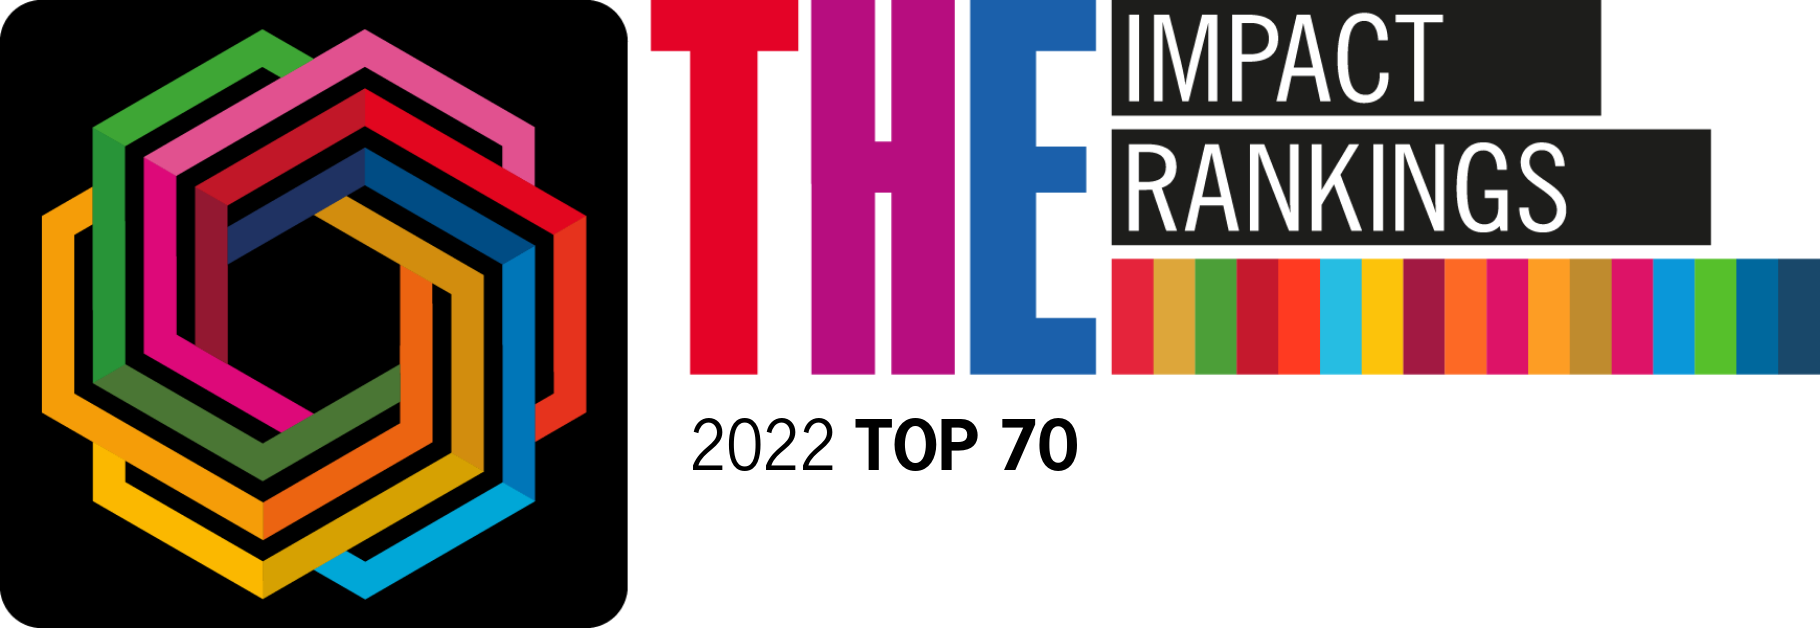 Times Higher Education Global Impact Ranking 2022